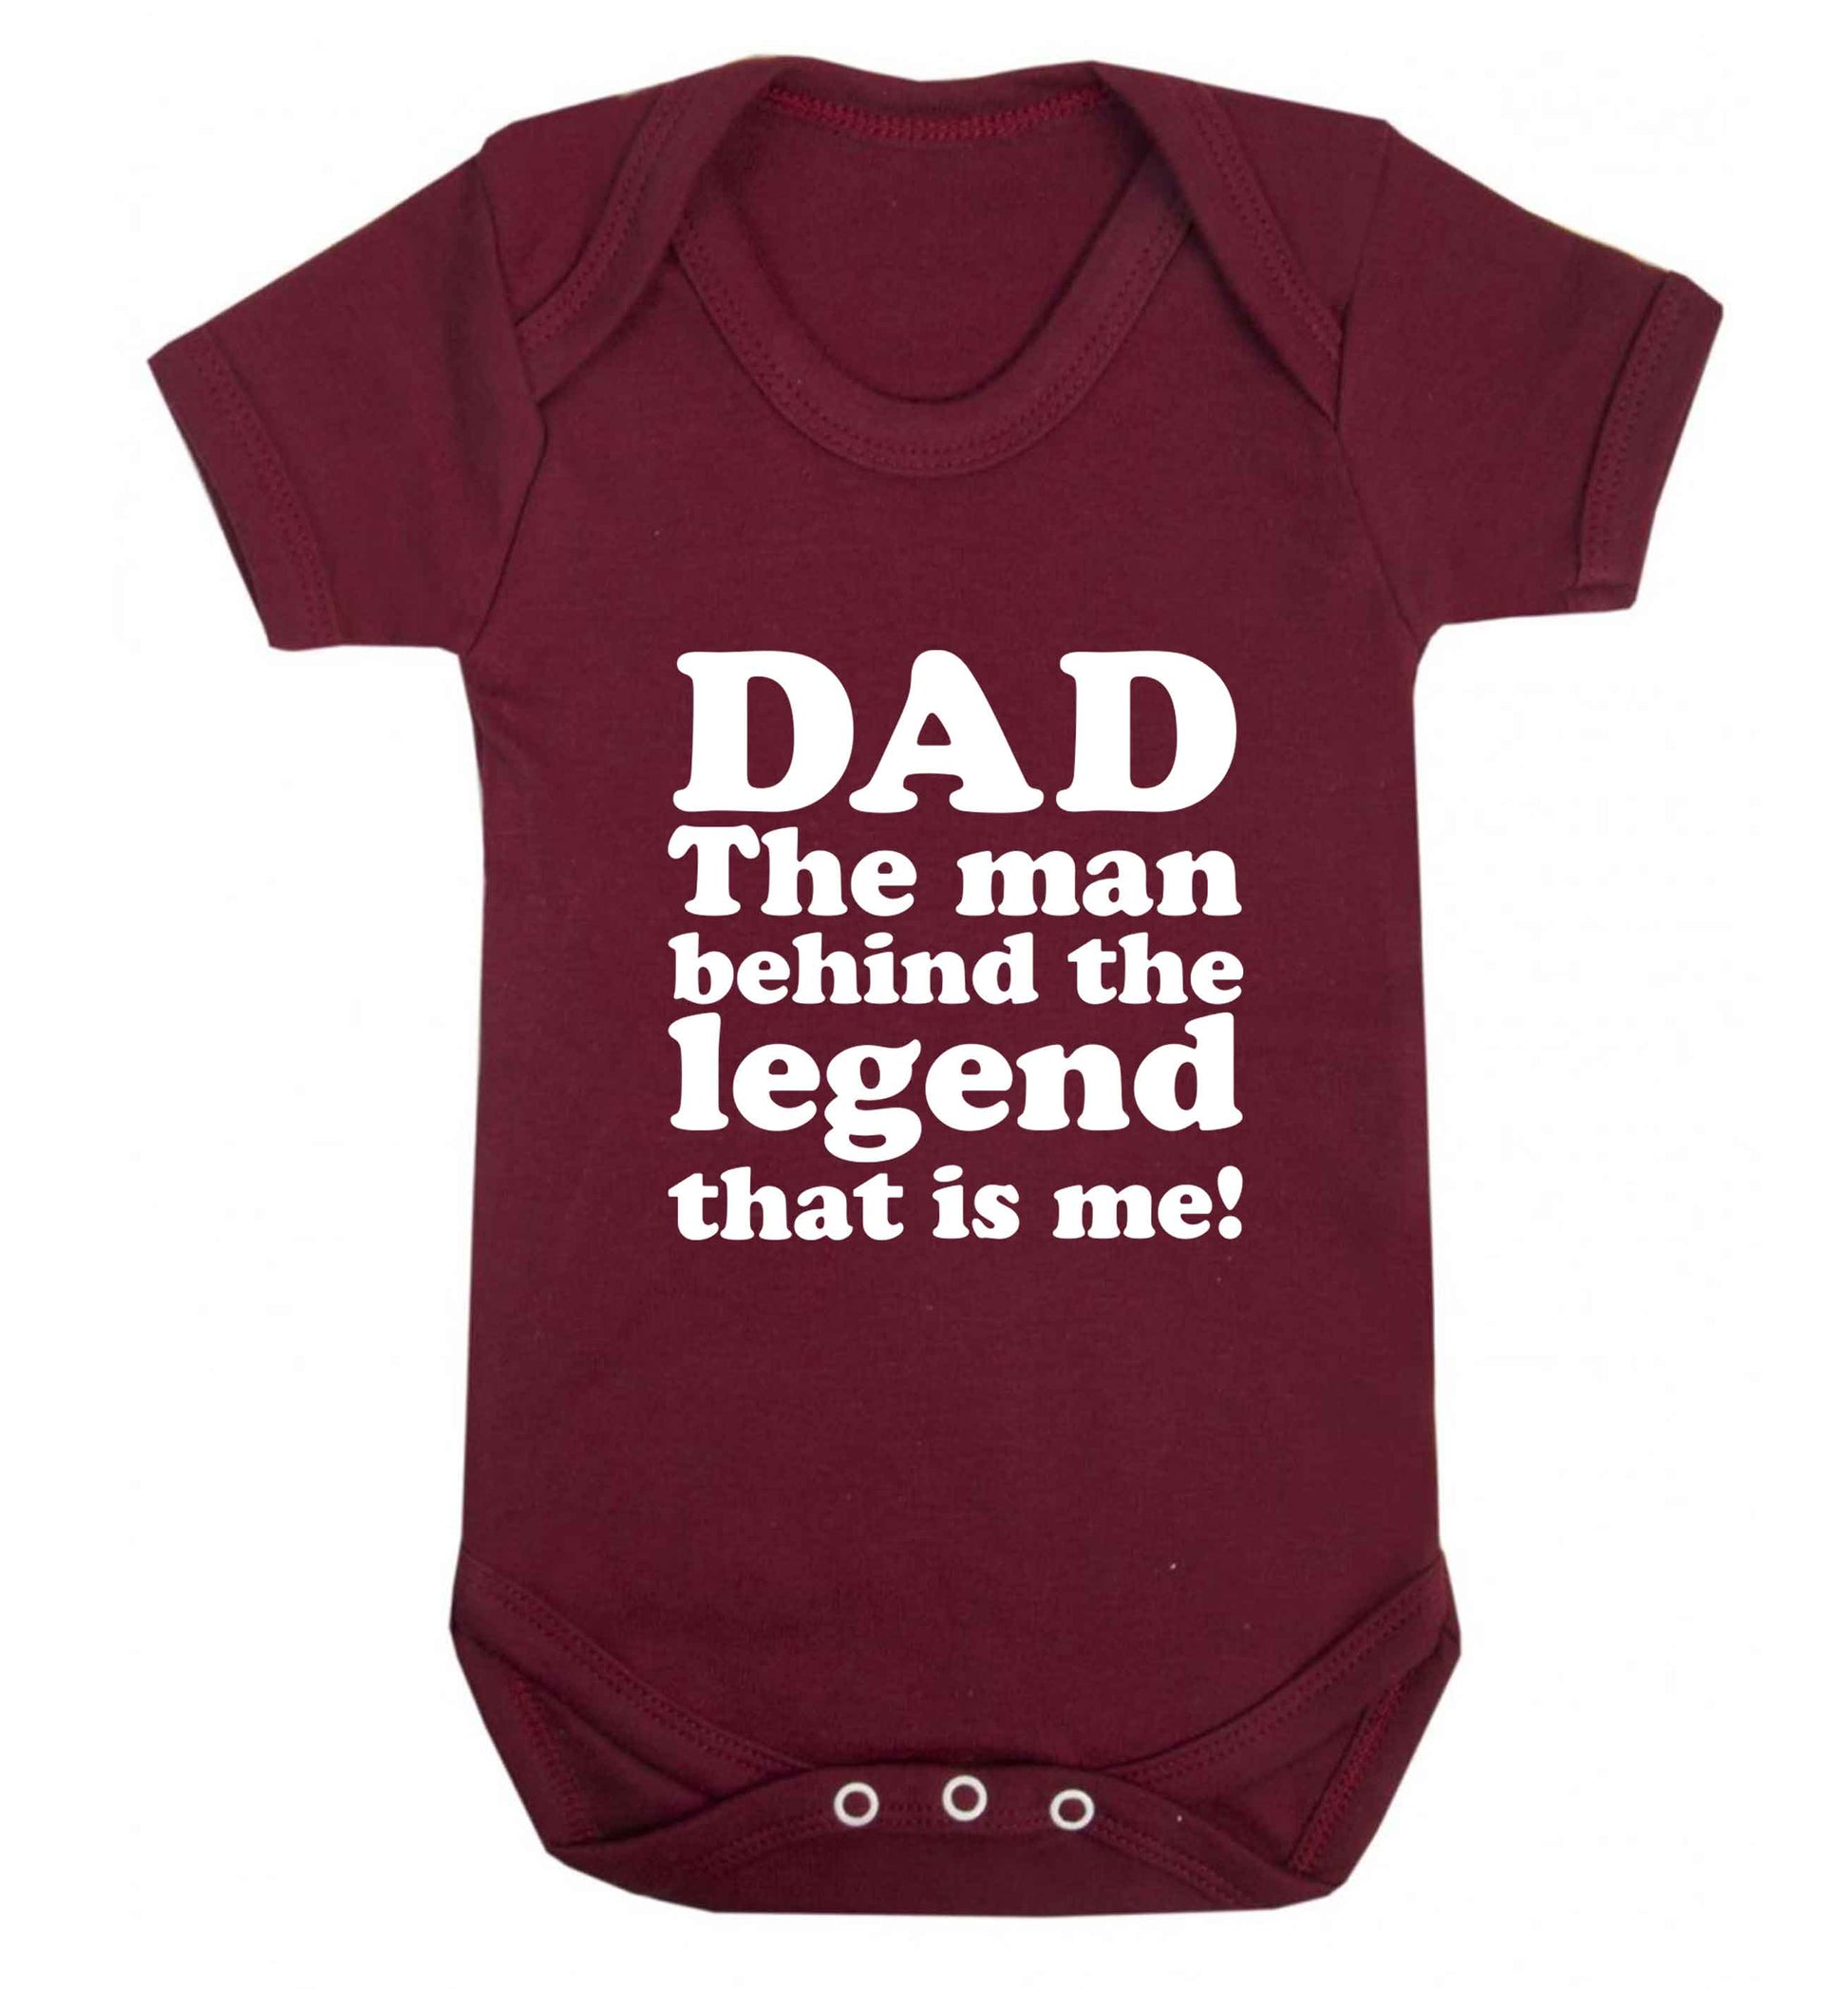 Dad the man behind the legend that is me baby vest maroon 18-24 months